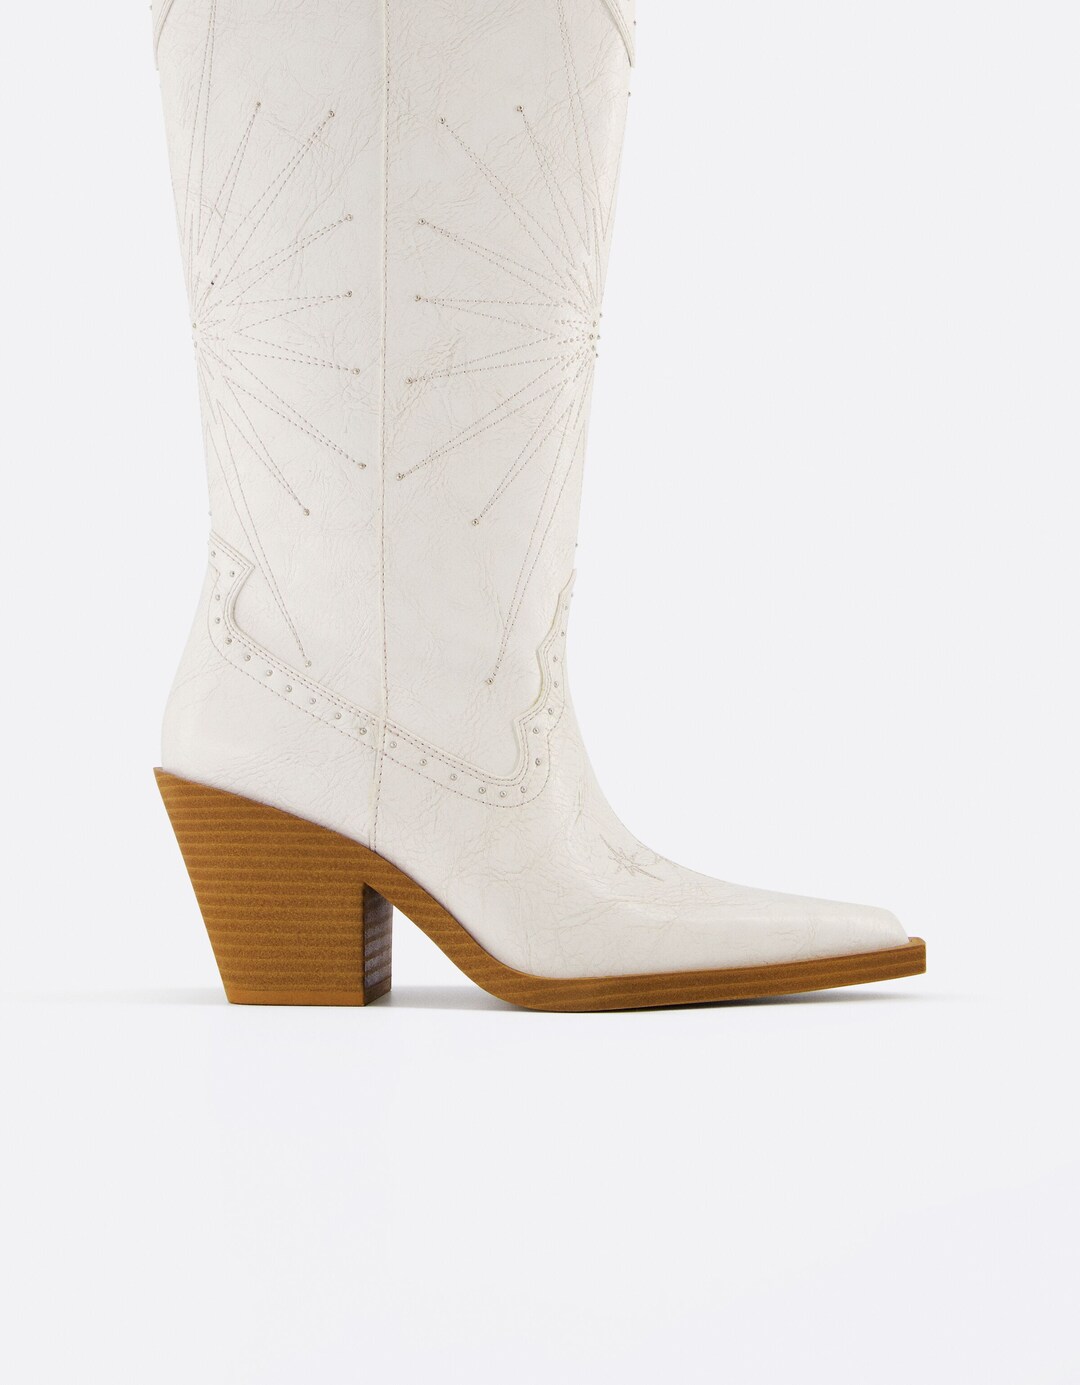 High-heel cowboy boots with studded detail